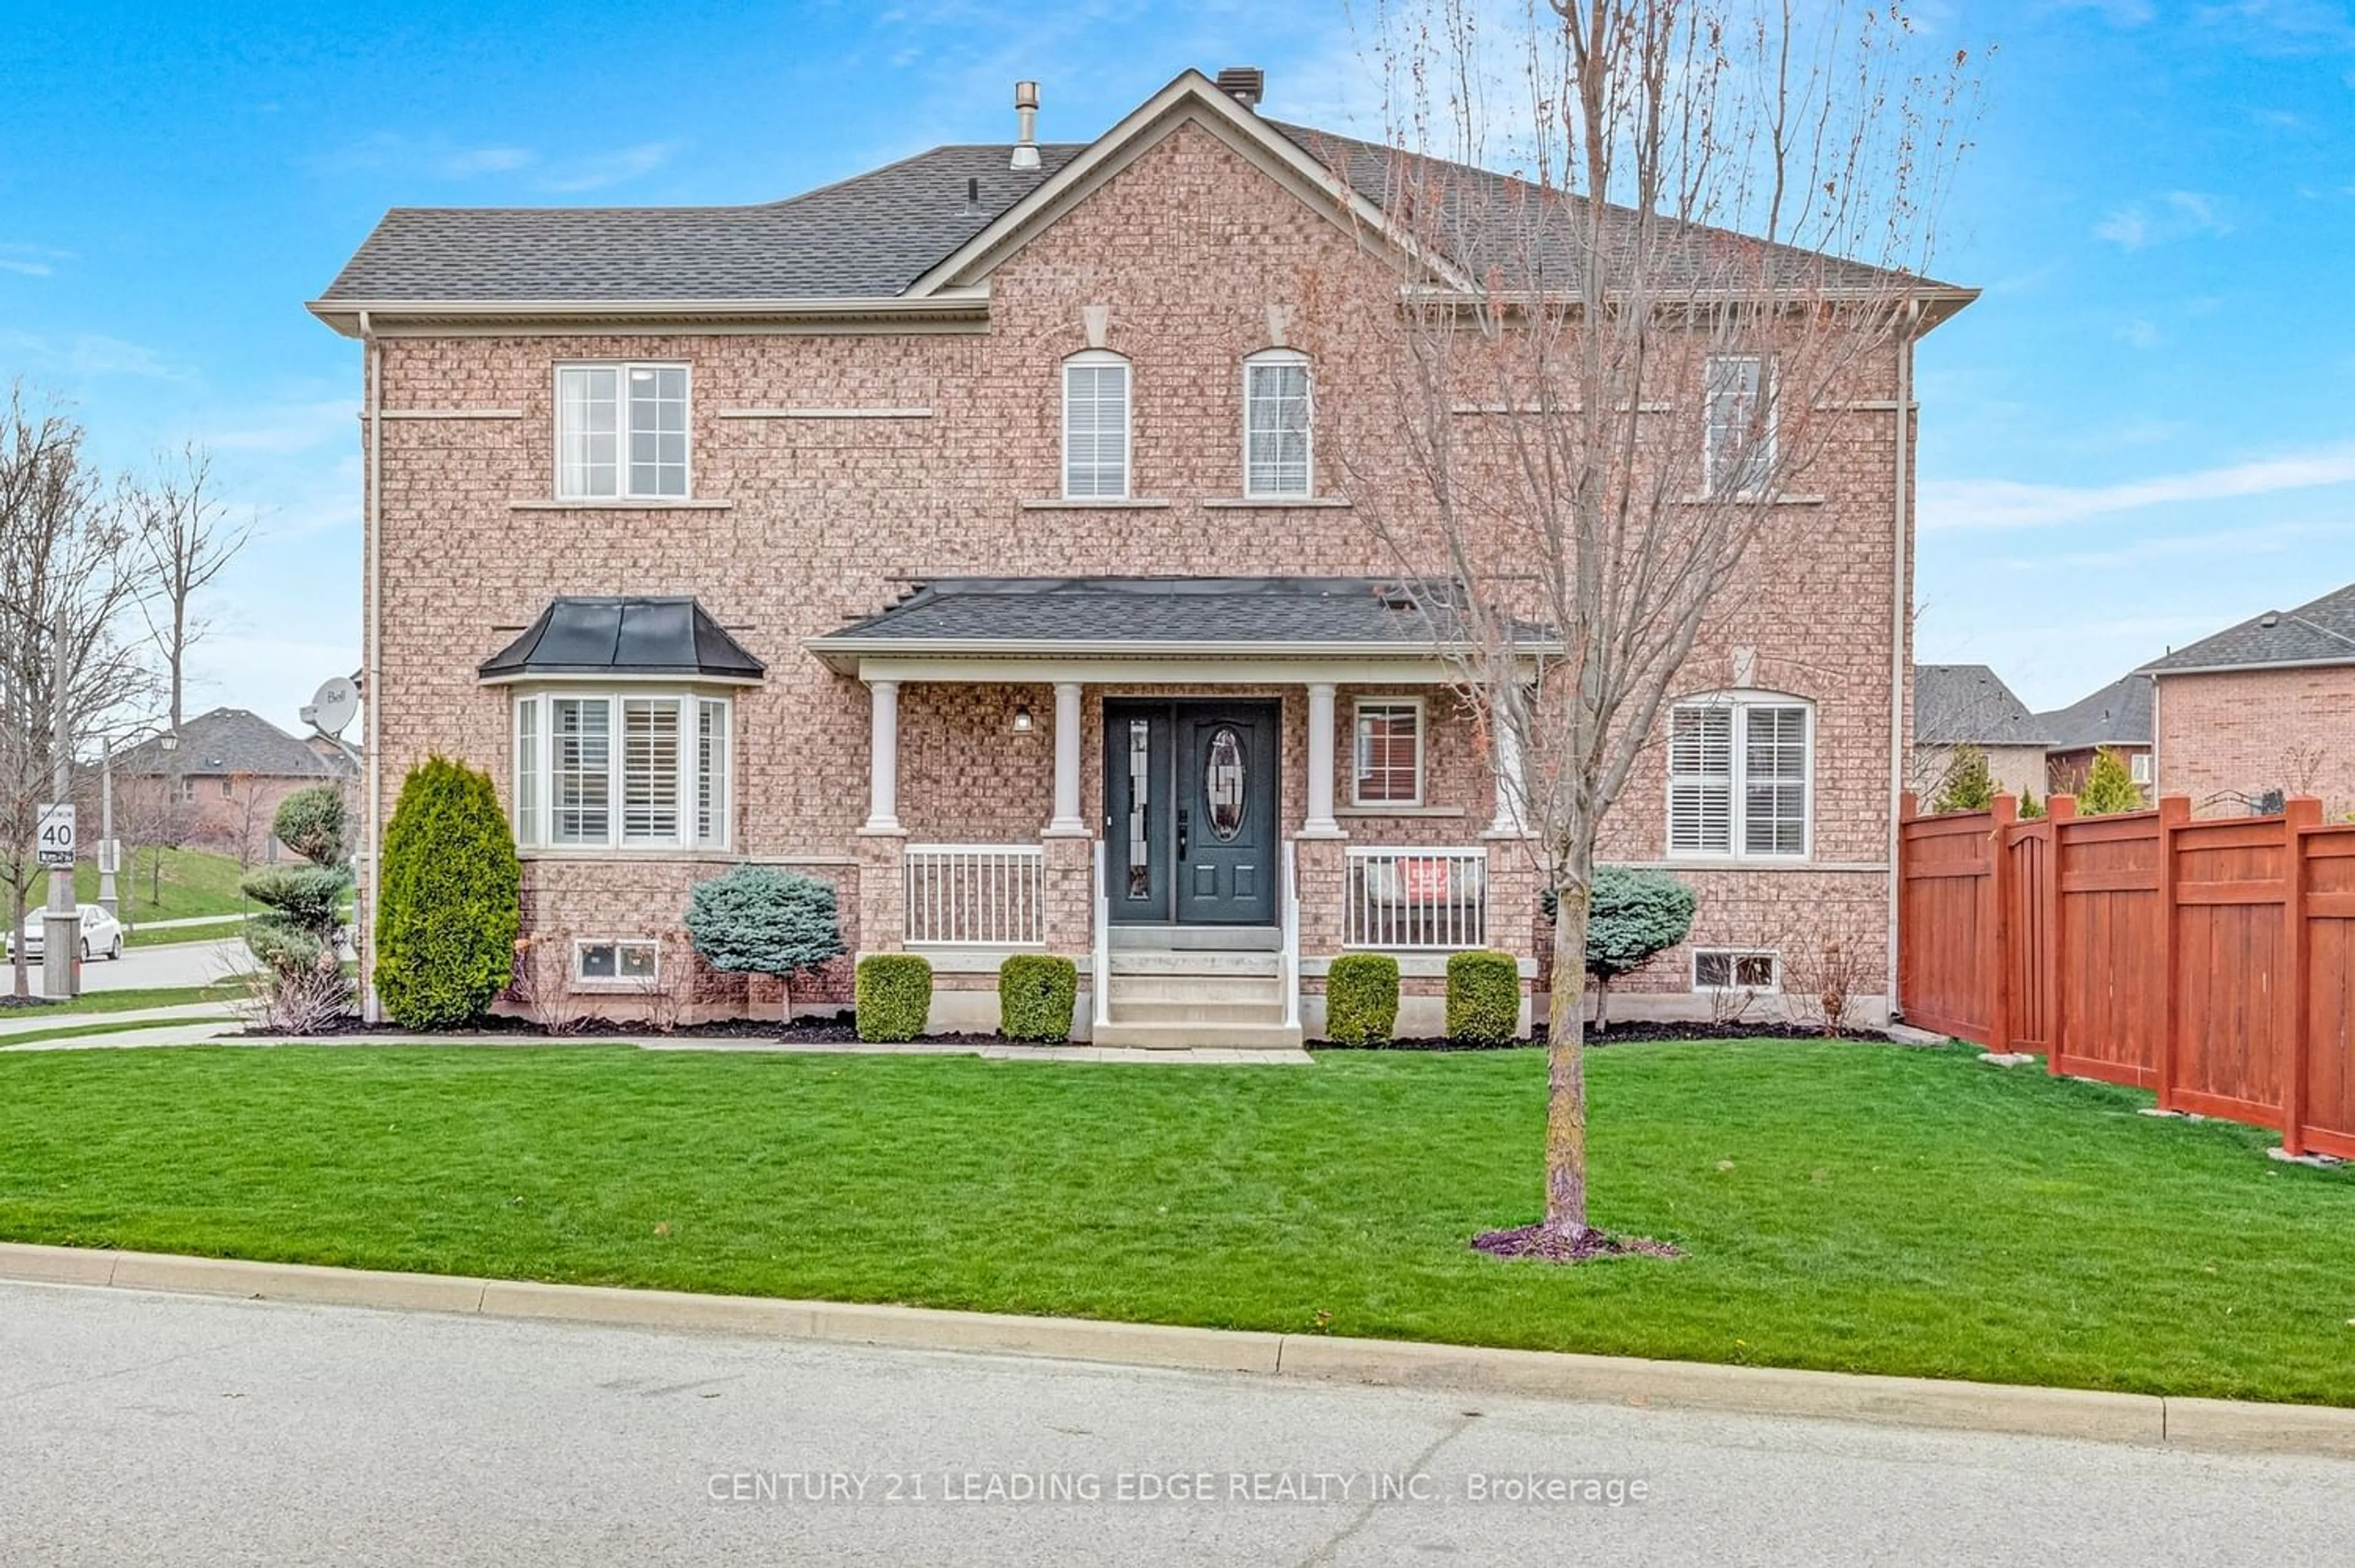 Home with brick exterior material for 146 Ken Laushway Ave, Whitchurch-Stouffville Ontario L4A 0J7